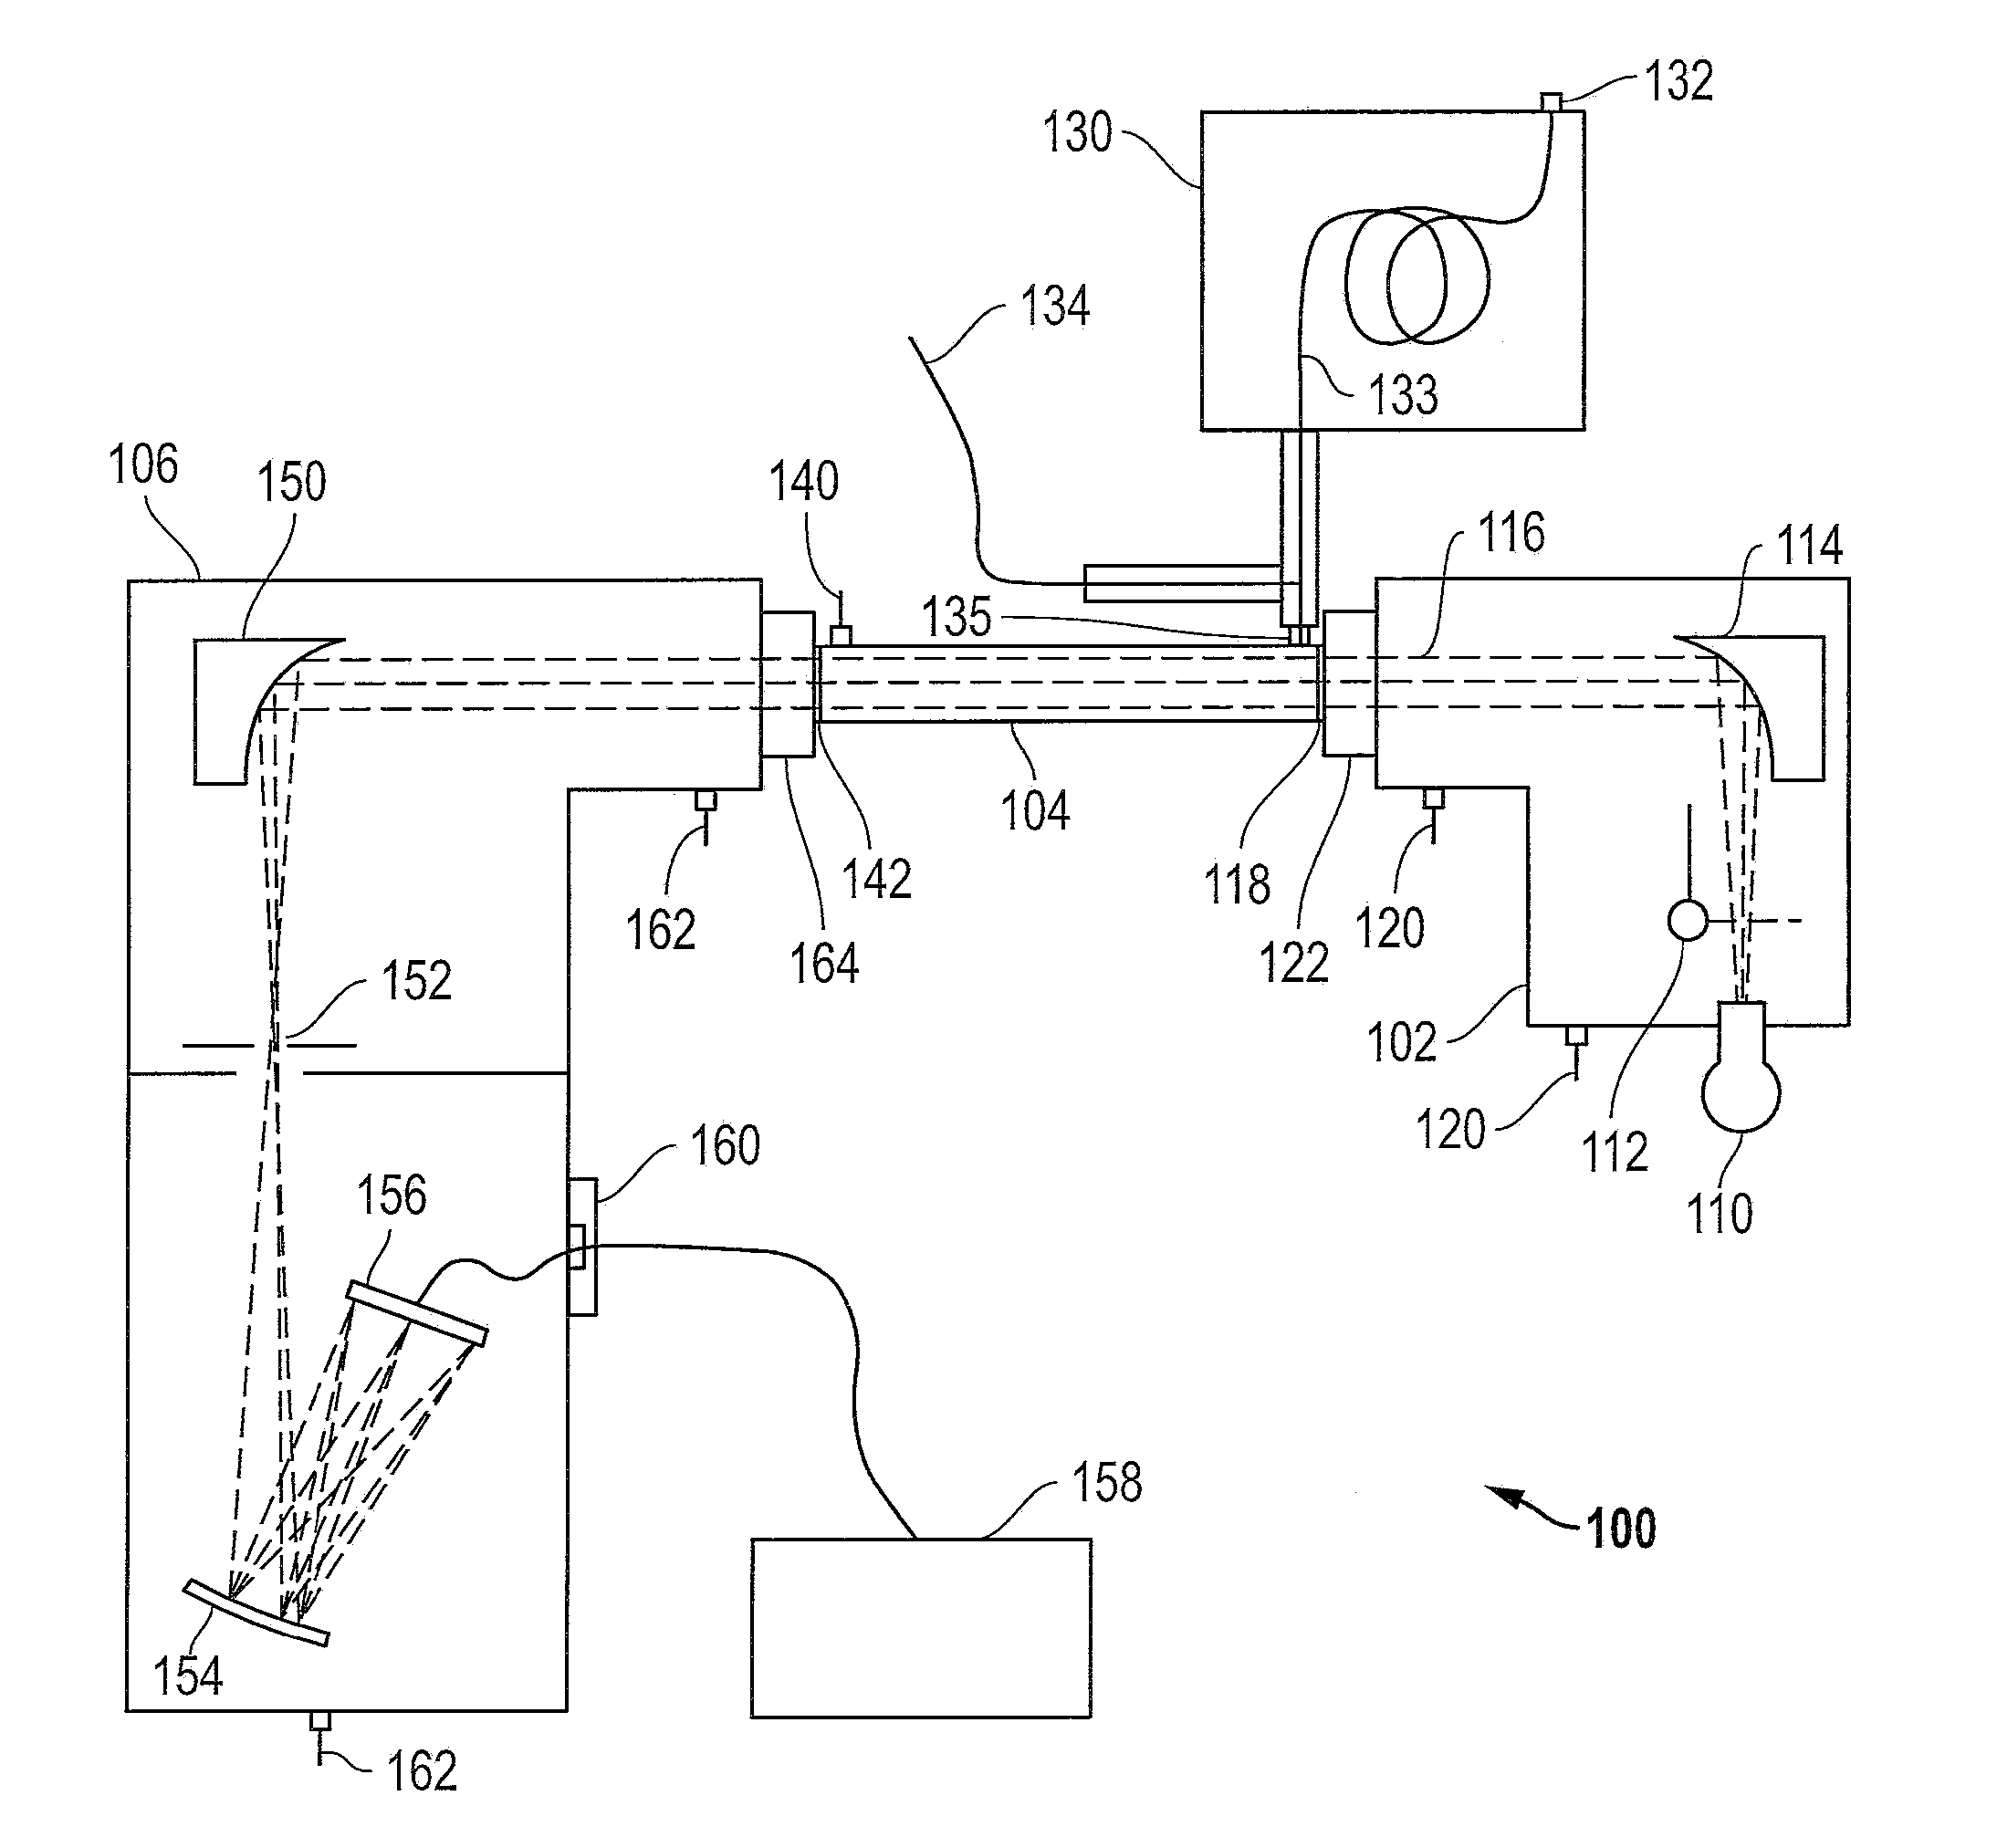 Vacuum Ultraviolet Absorption Spectroscopy System And Method